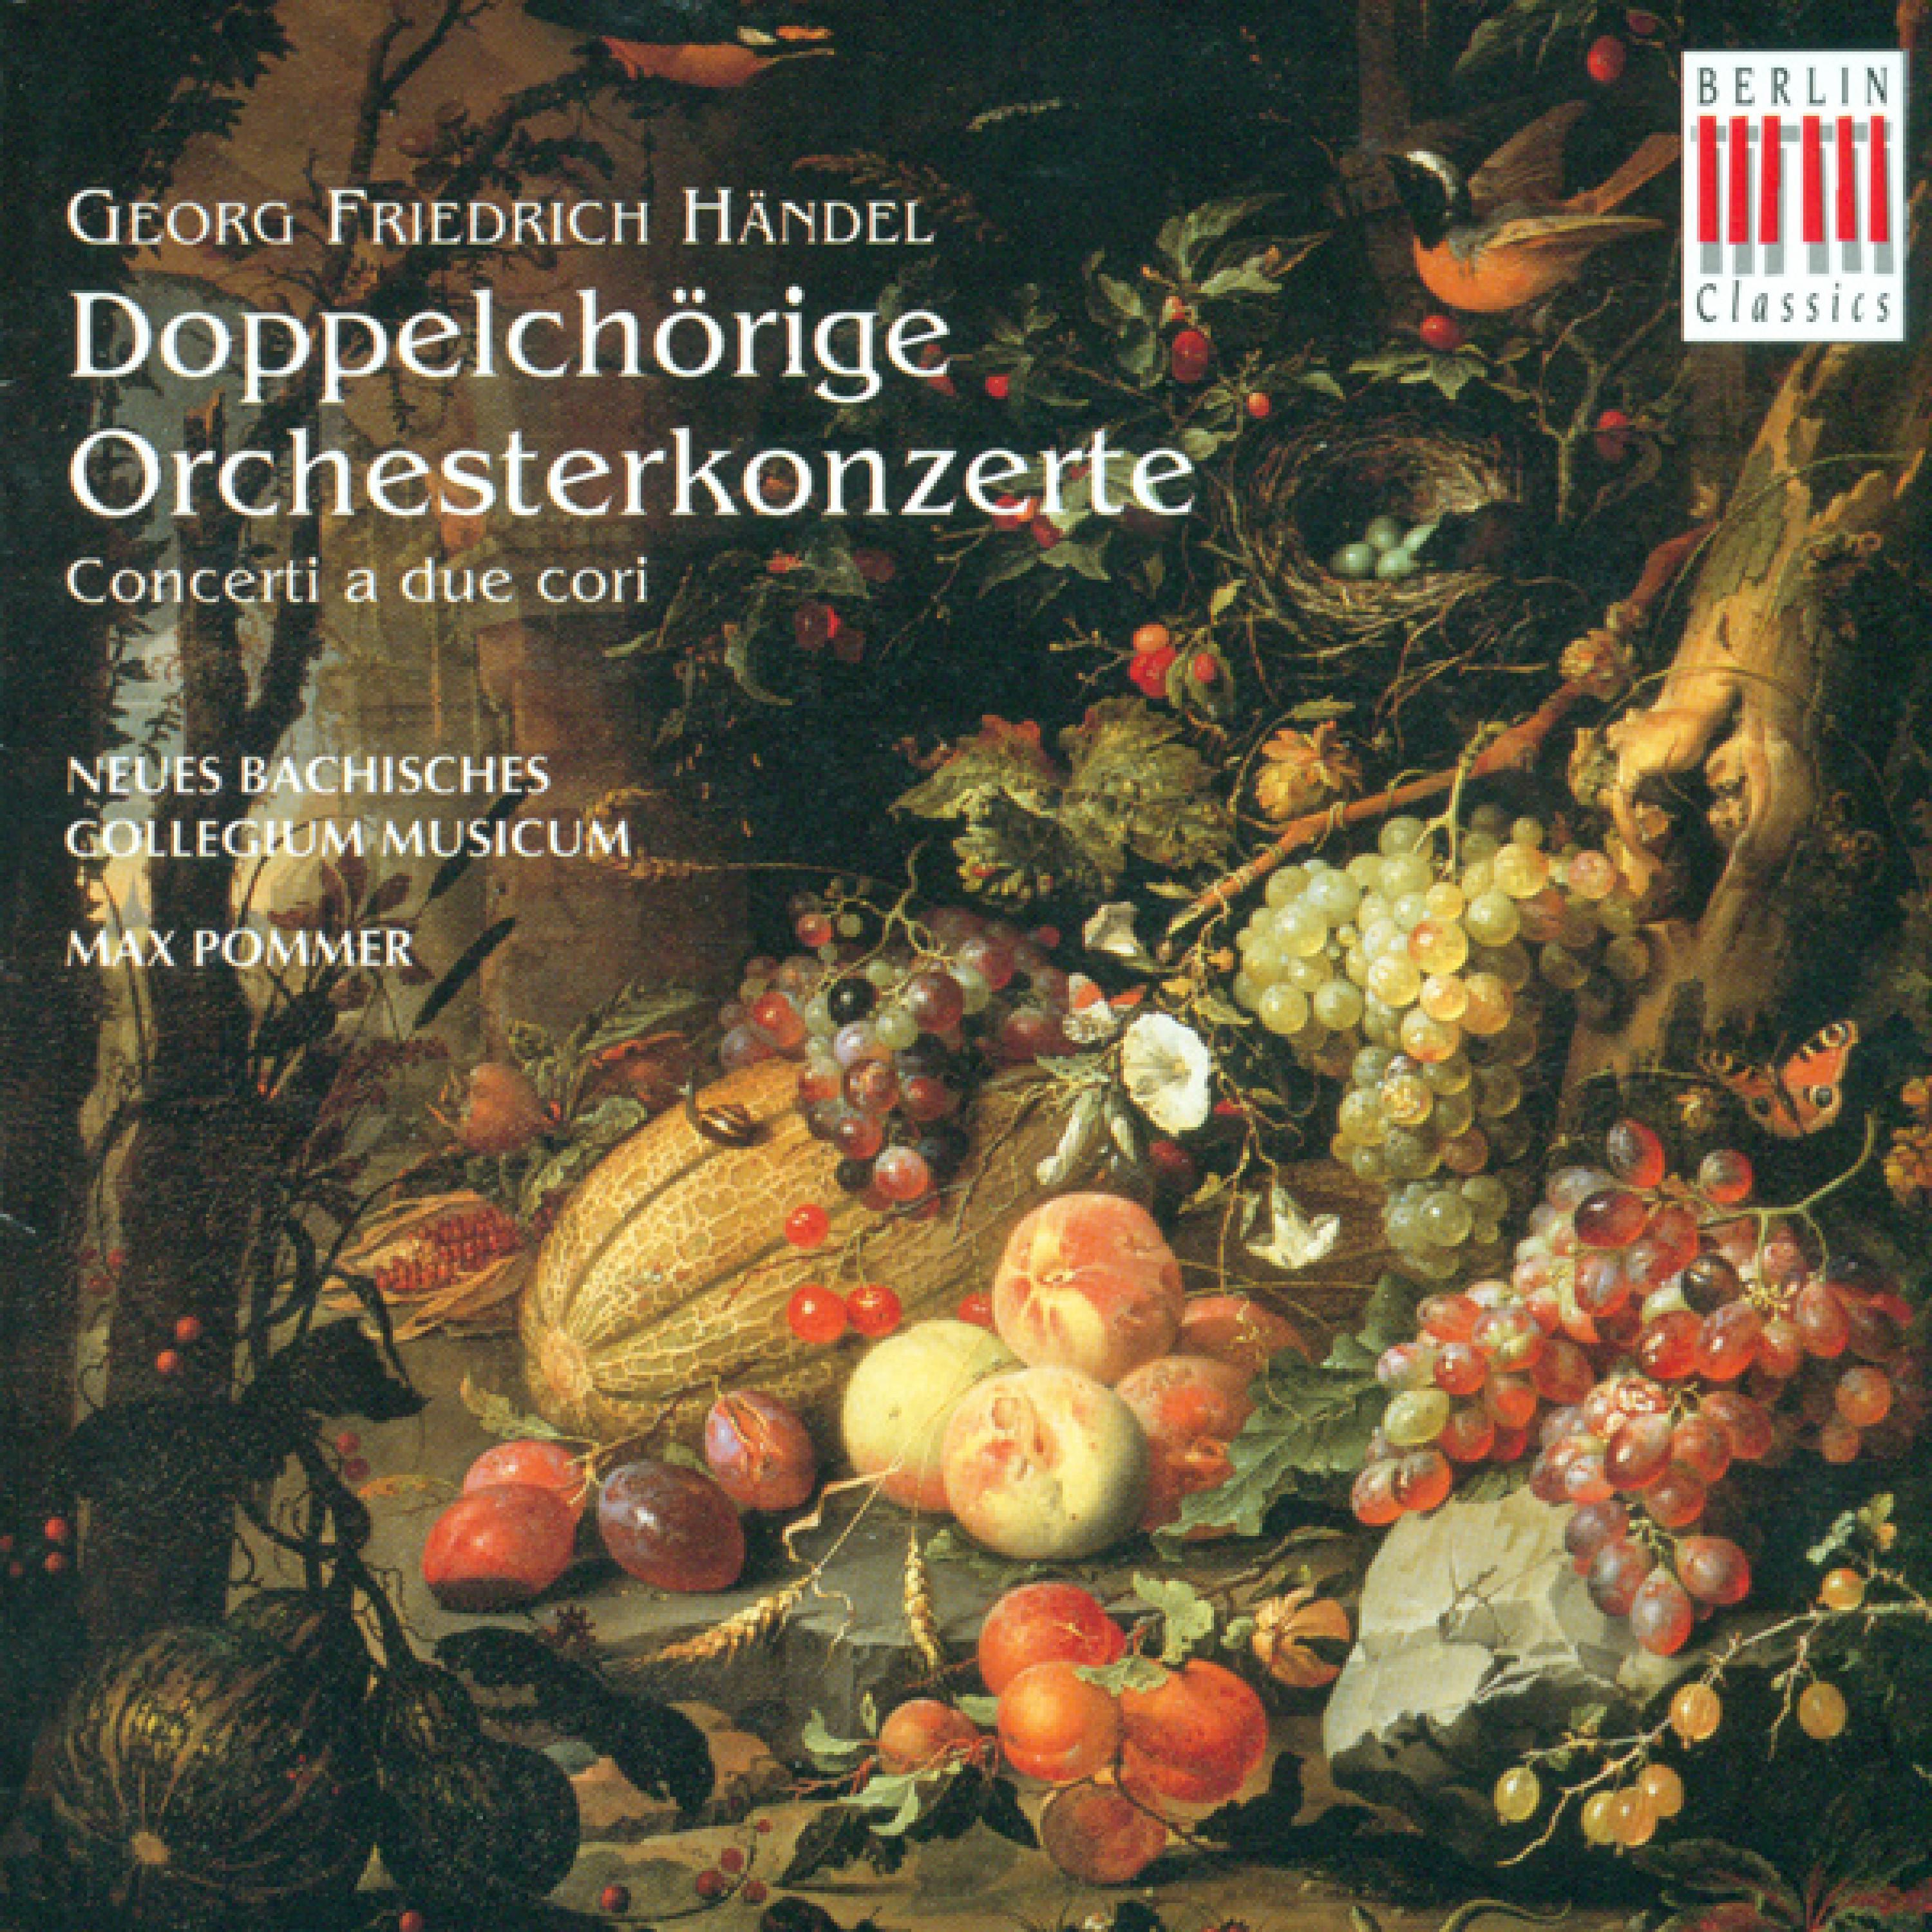 Concerto a due cori in B flat major, Op. 1, HWV 332: I. Ouverture